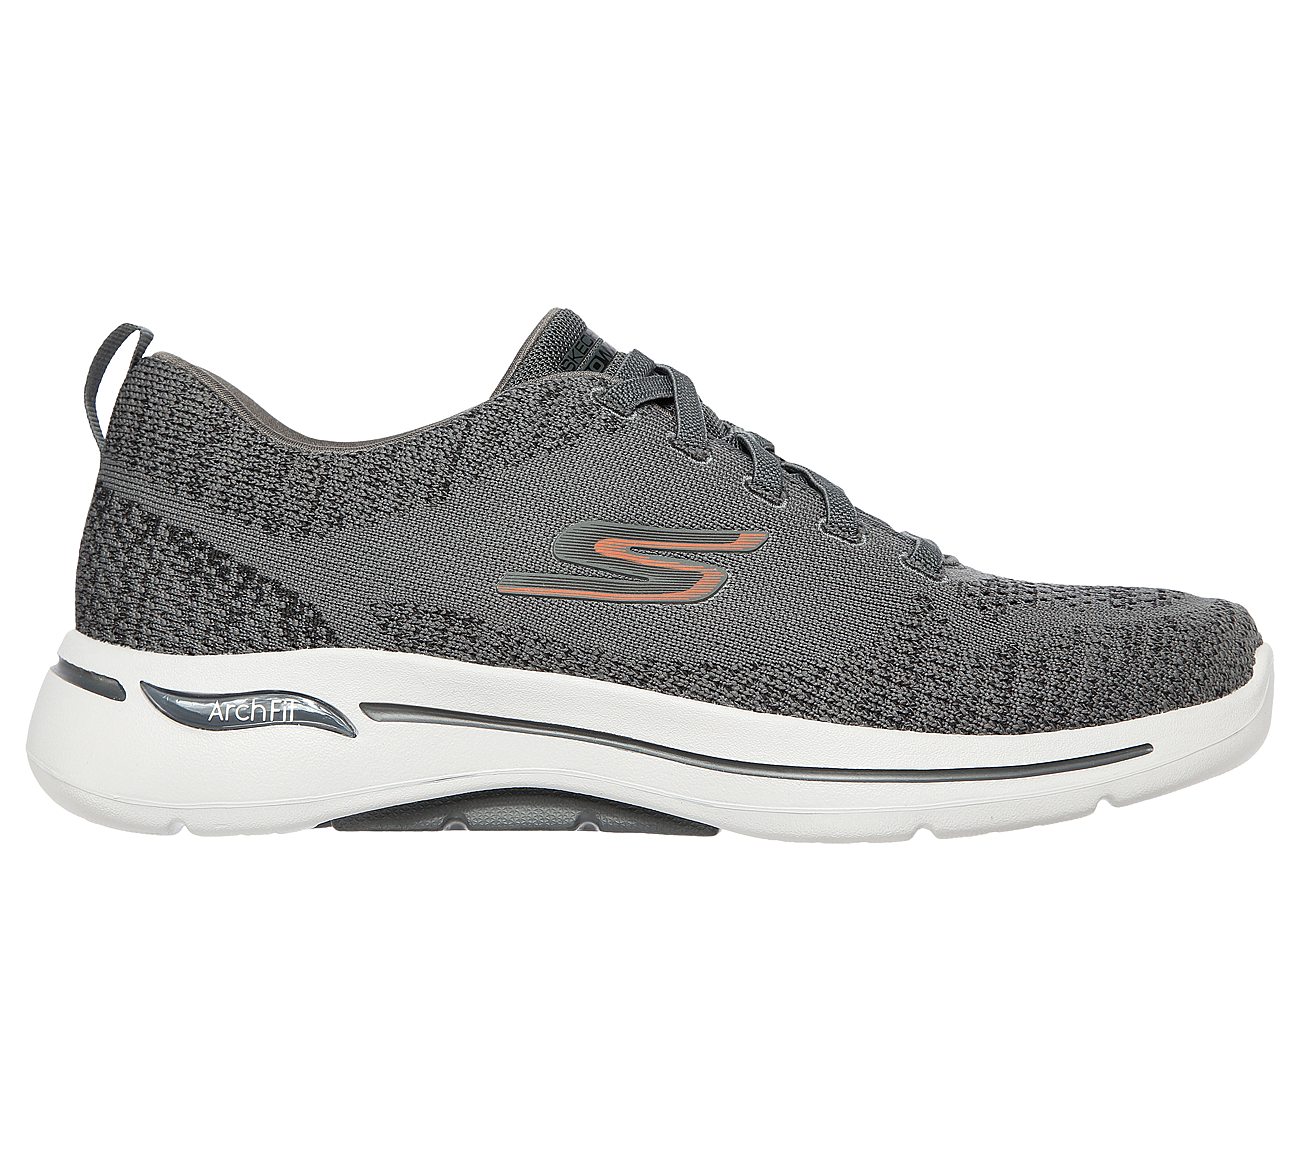 Skechers Charcoal Go Walk Arch Fit Grand Select Mens Lace Up Shoes ...